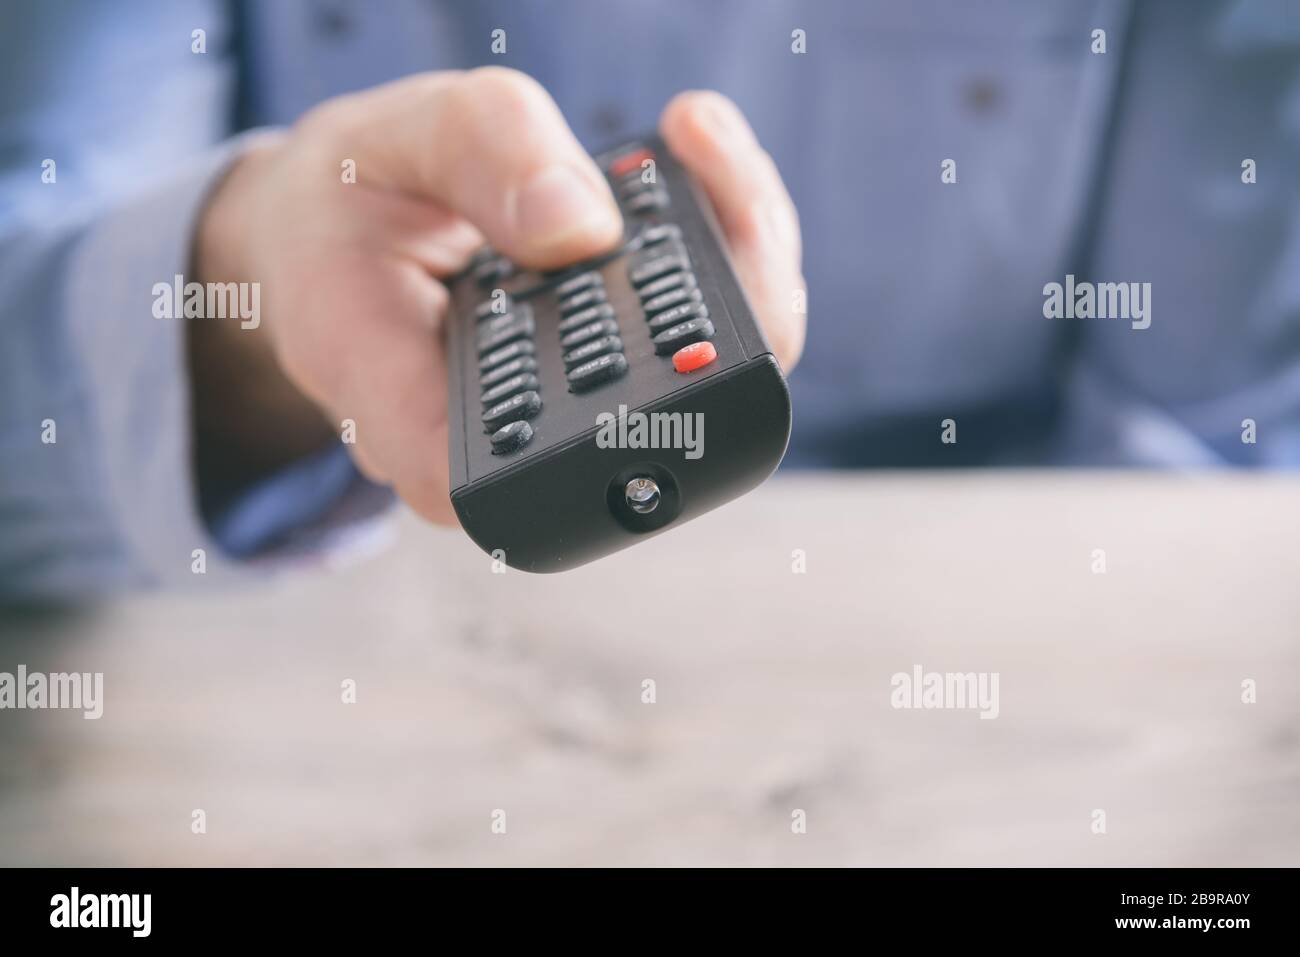 Man holding tv remote control and changing TV channels Stock Photo